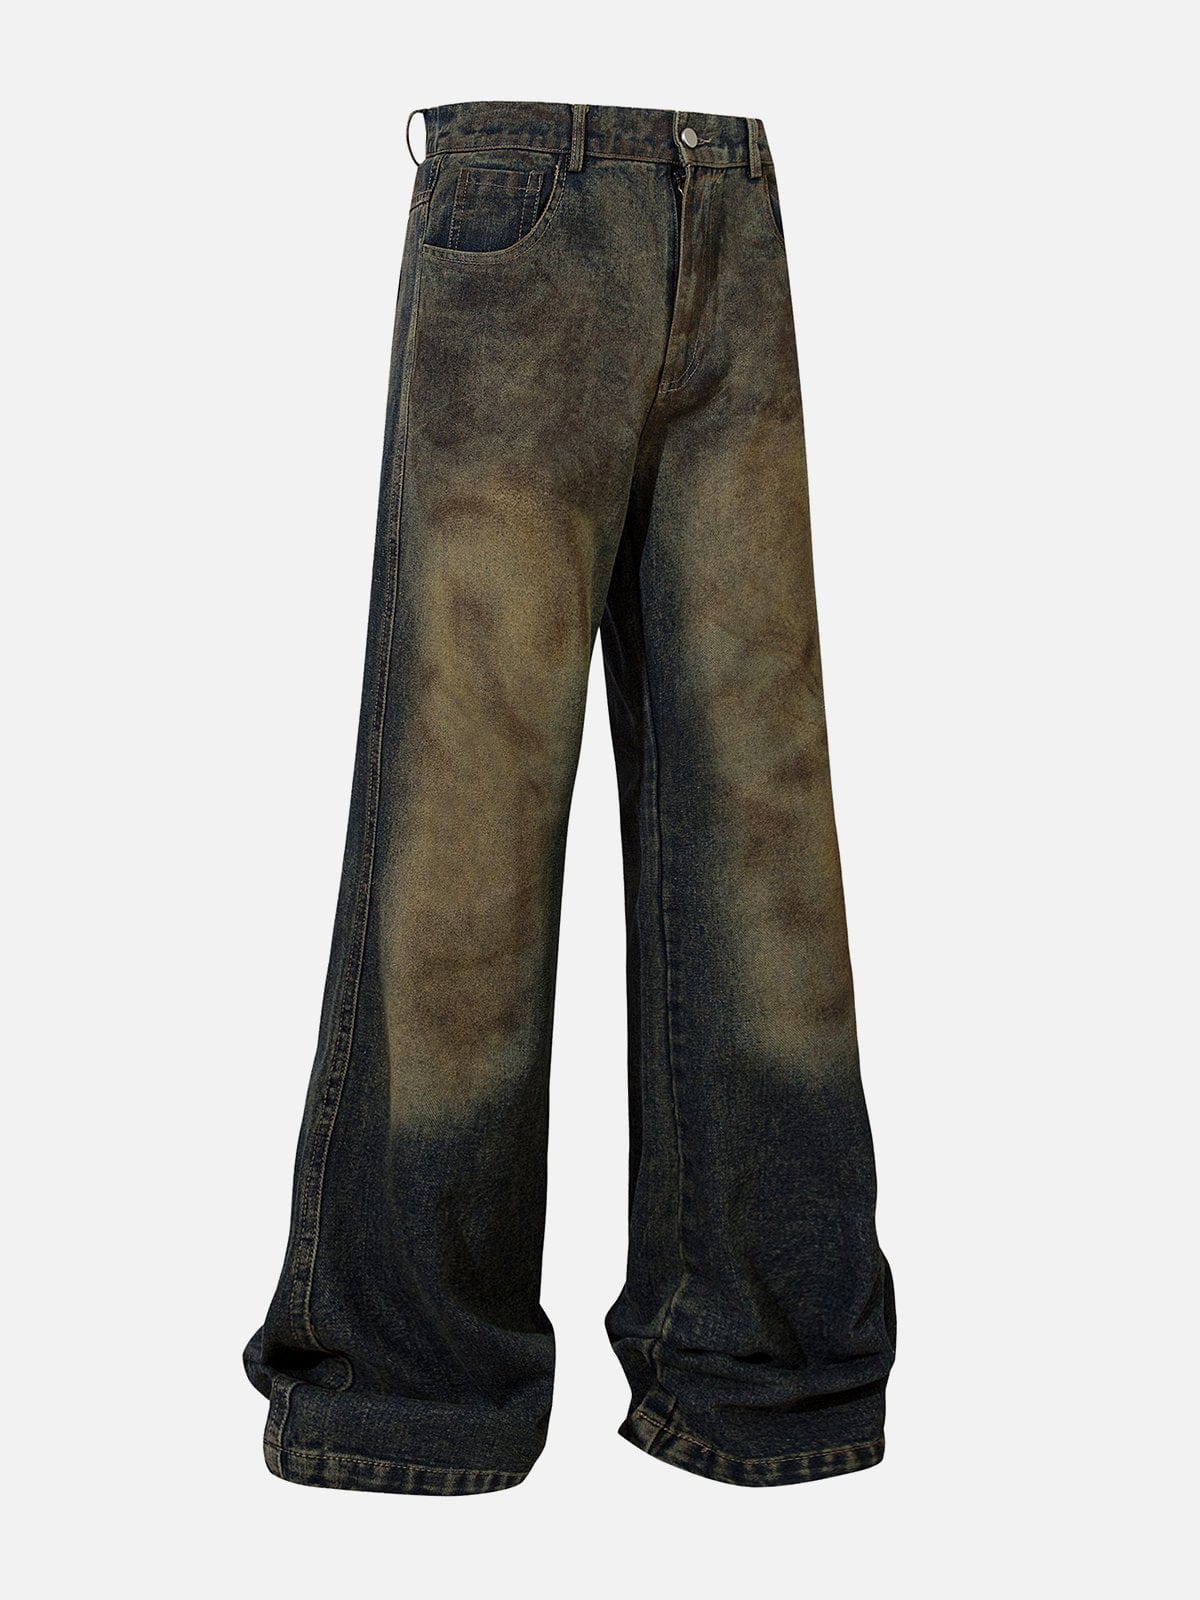 NEV Wasteland Style Mud-Dyed Bootcut Jeans